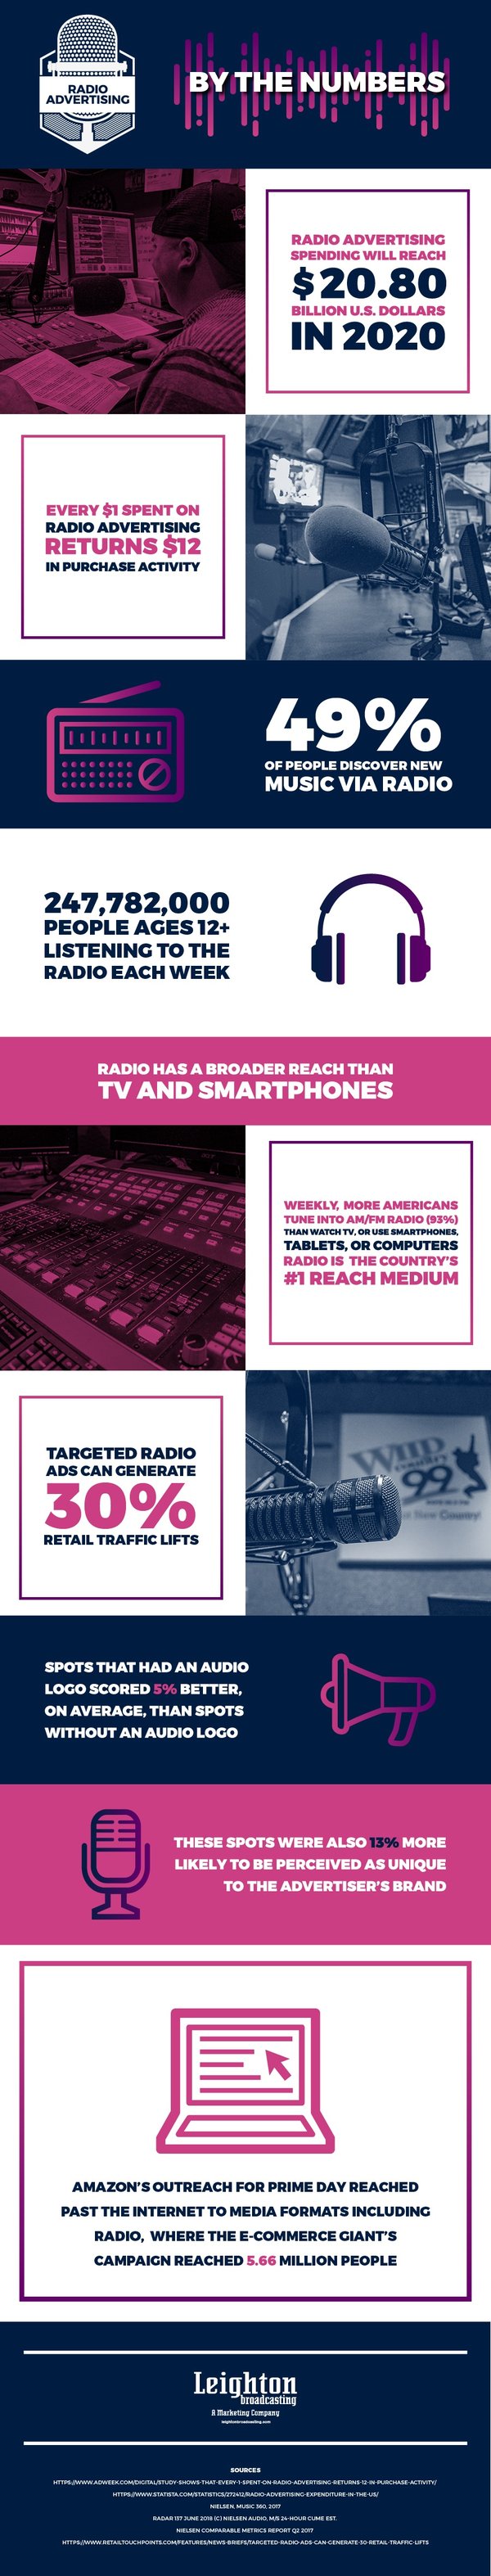 LB-Radio-Advertising-Numbers-Infographic-08-06-2018-Final